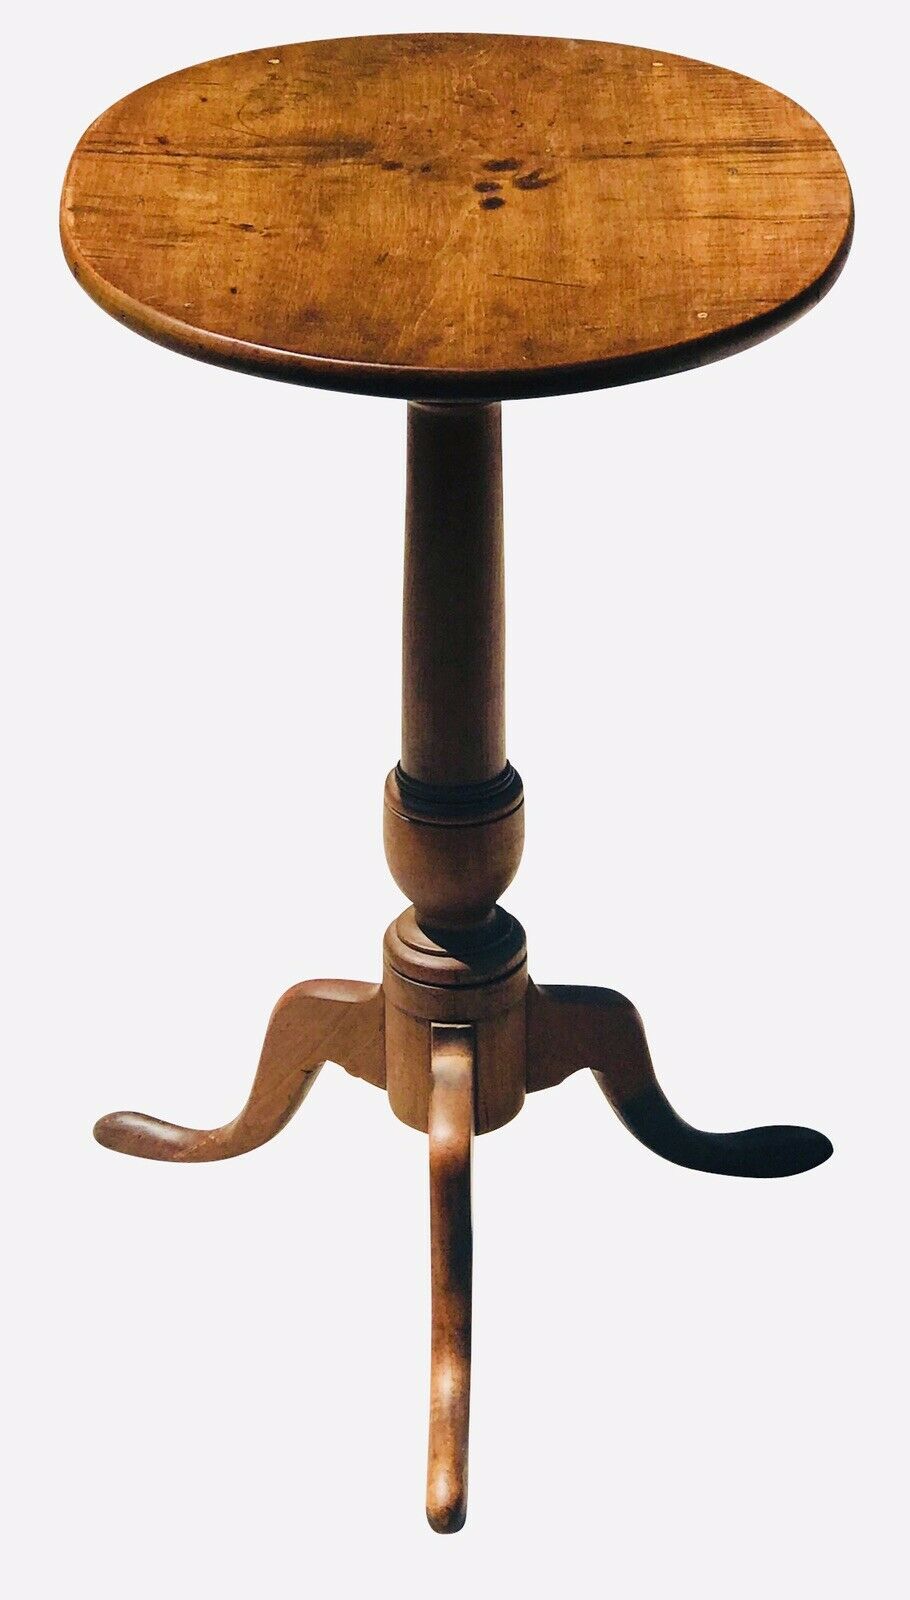 18TH C ANTIQUE QUEEN ANNE PERIOD TIGER MAPLE CANDLE STAND